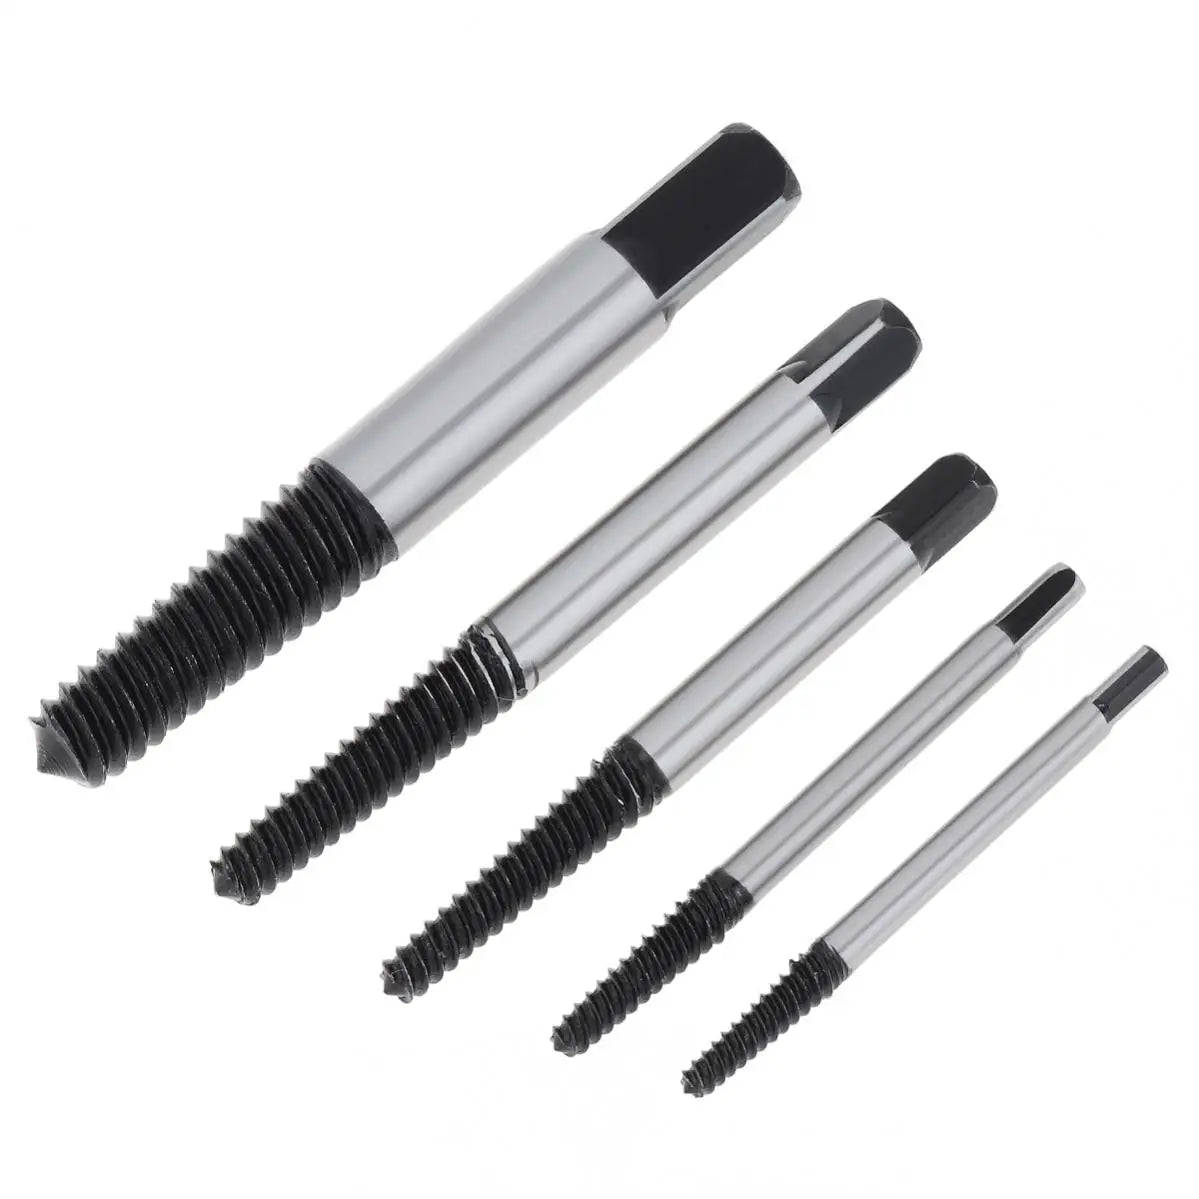 5pcs 40Cr Stainless Steel Screw Extractor Kit